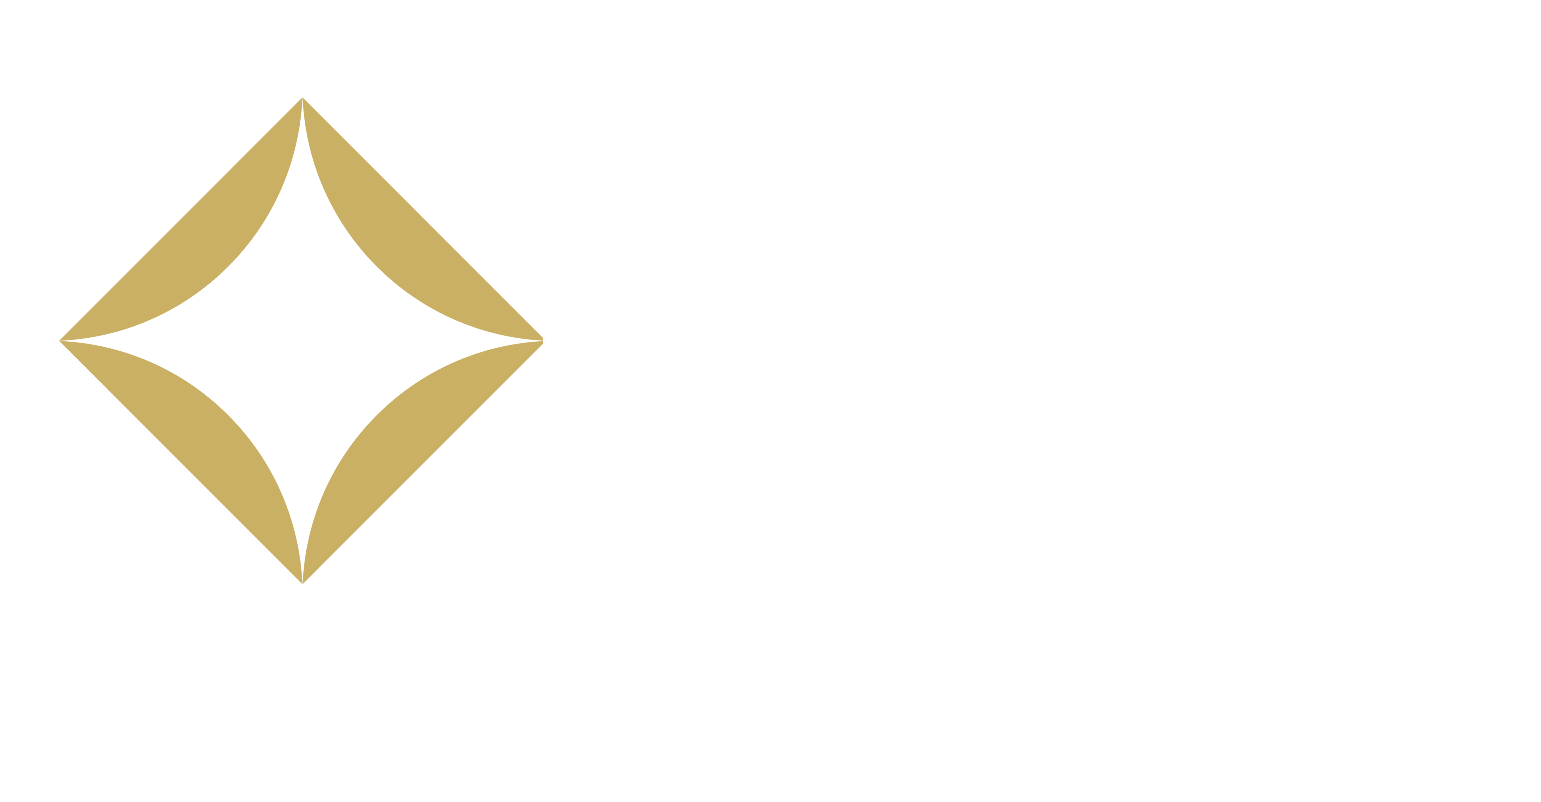 Best Estate Agent Guide 2021 - Exceptional